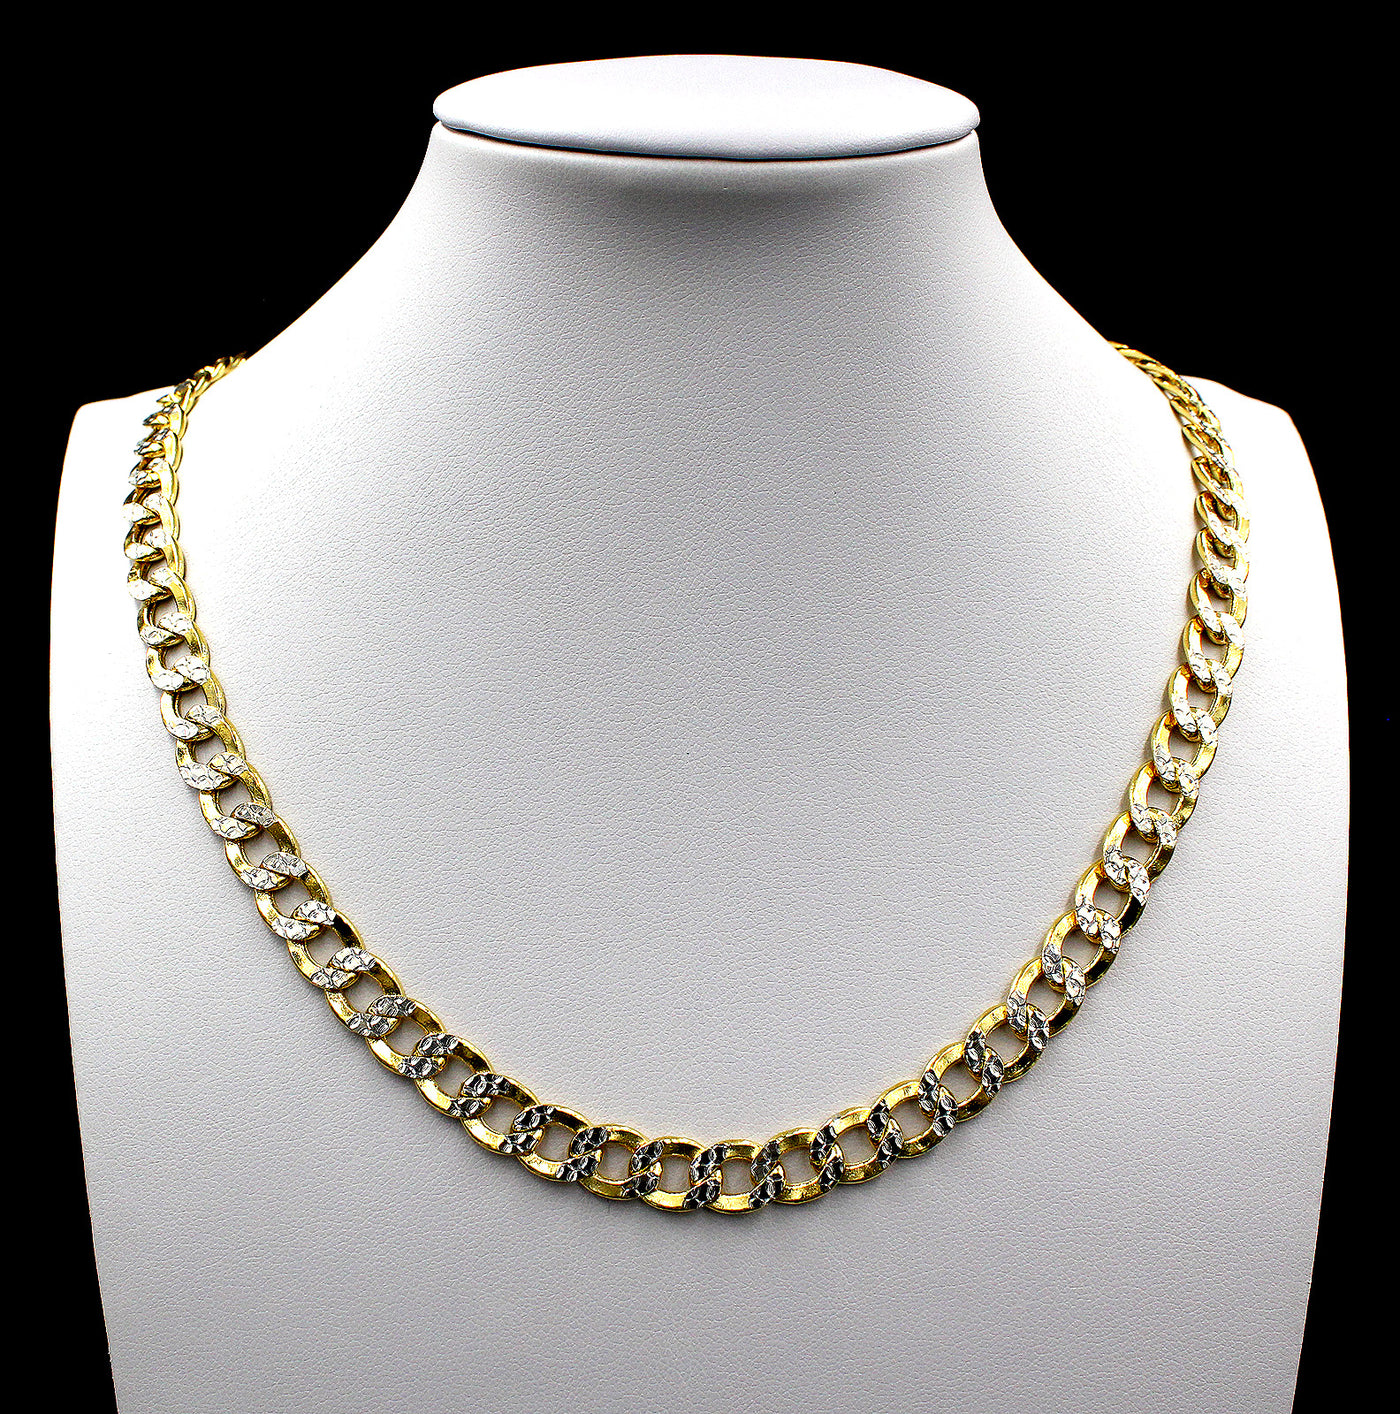 10K Solid Yellow Gold Diamond Cut Pave Cuban Link Chain Necklace 6.5MM 20" 22" 24" 26"